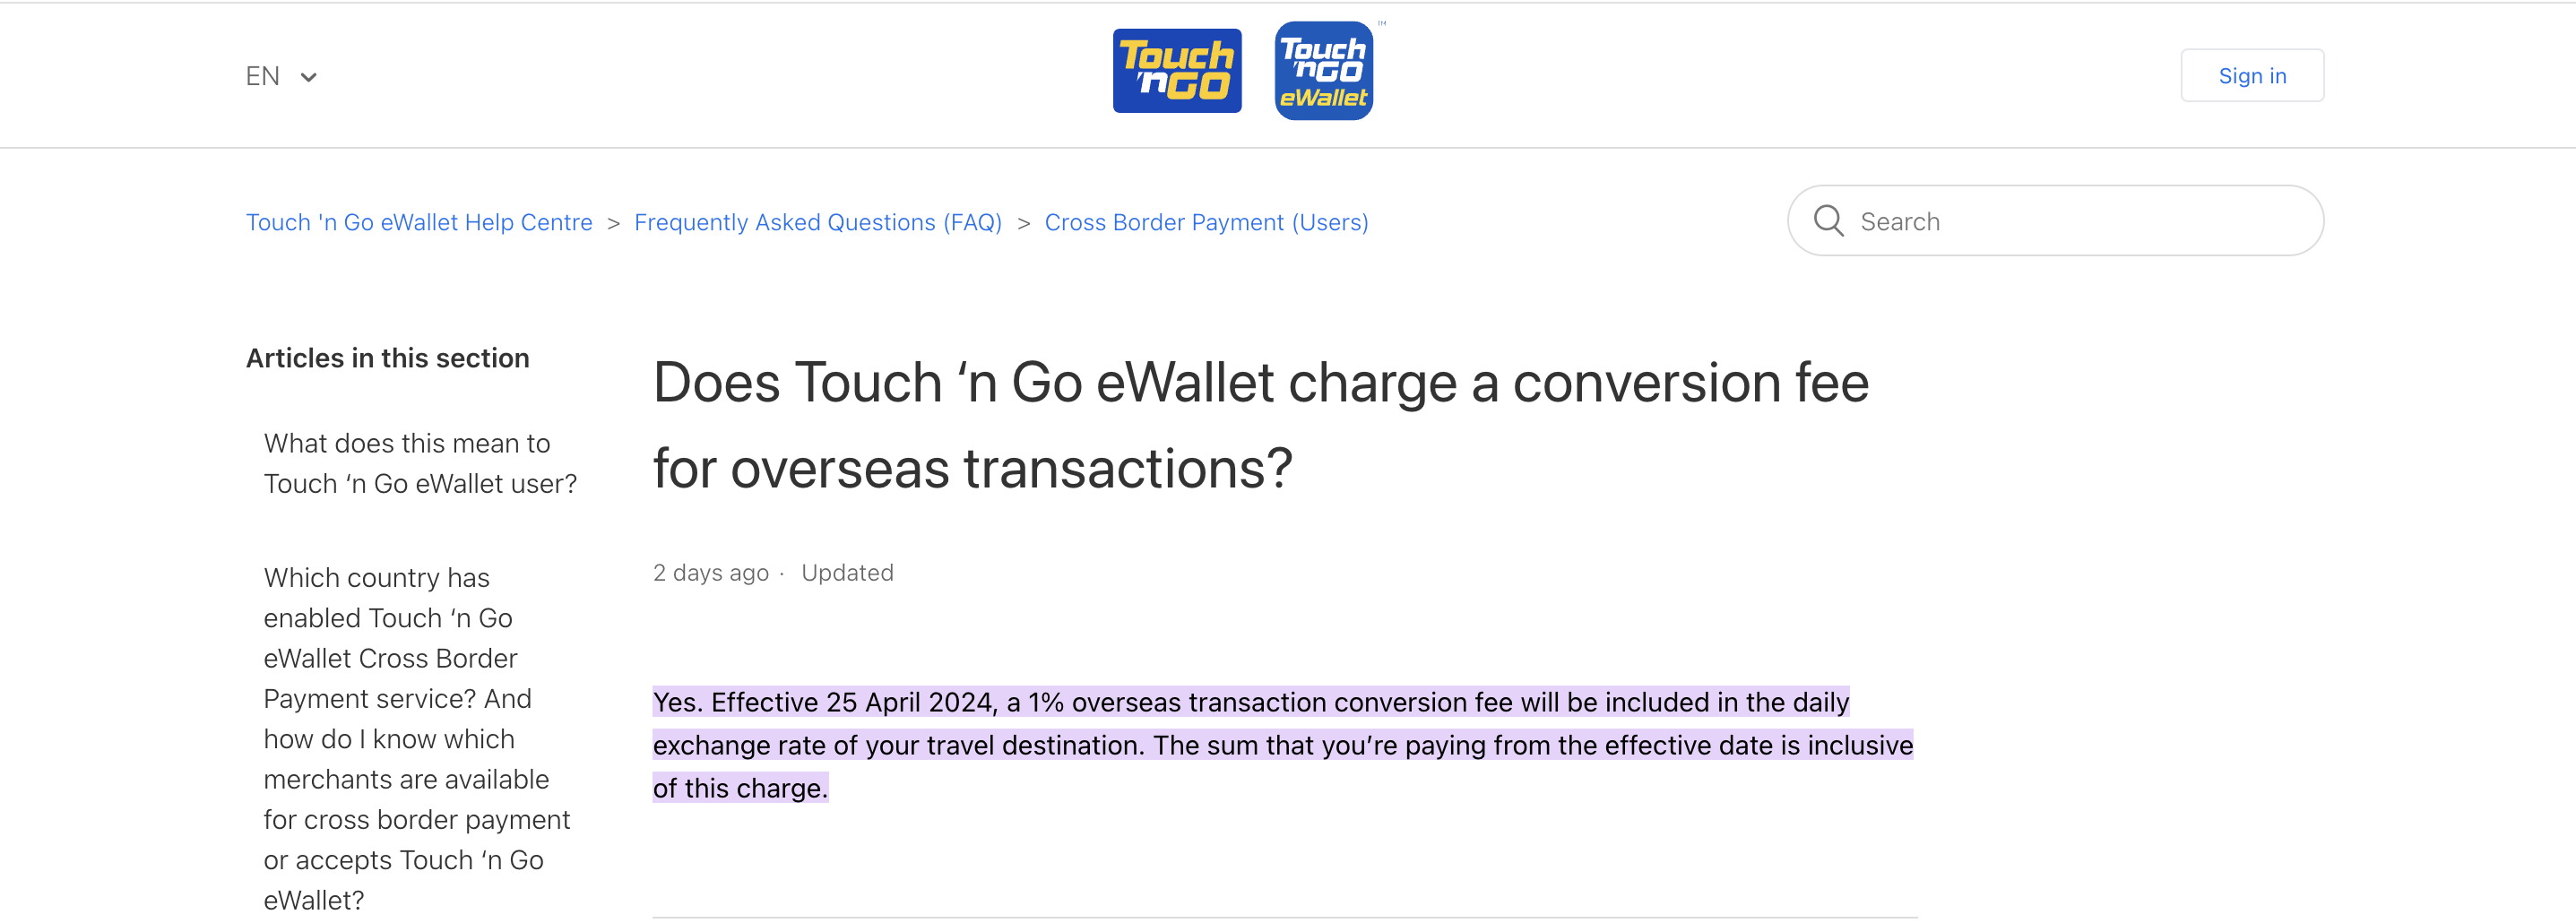 Tng ewallet to impose 1% conversion fees for all overseas transactions starting 25 april 1